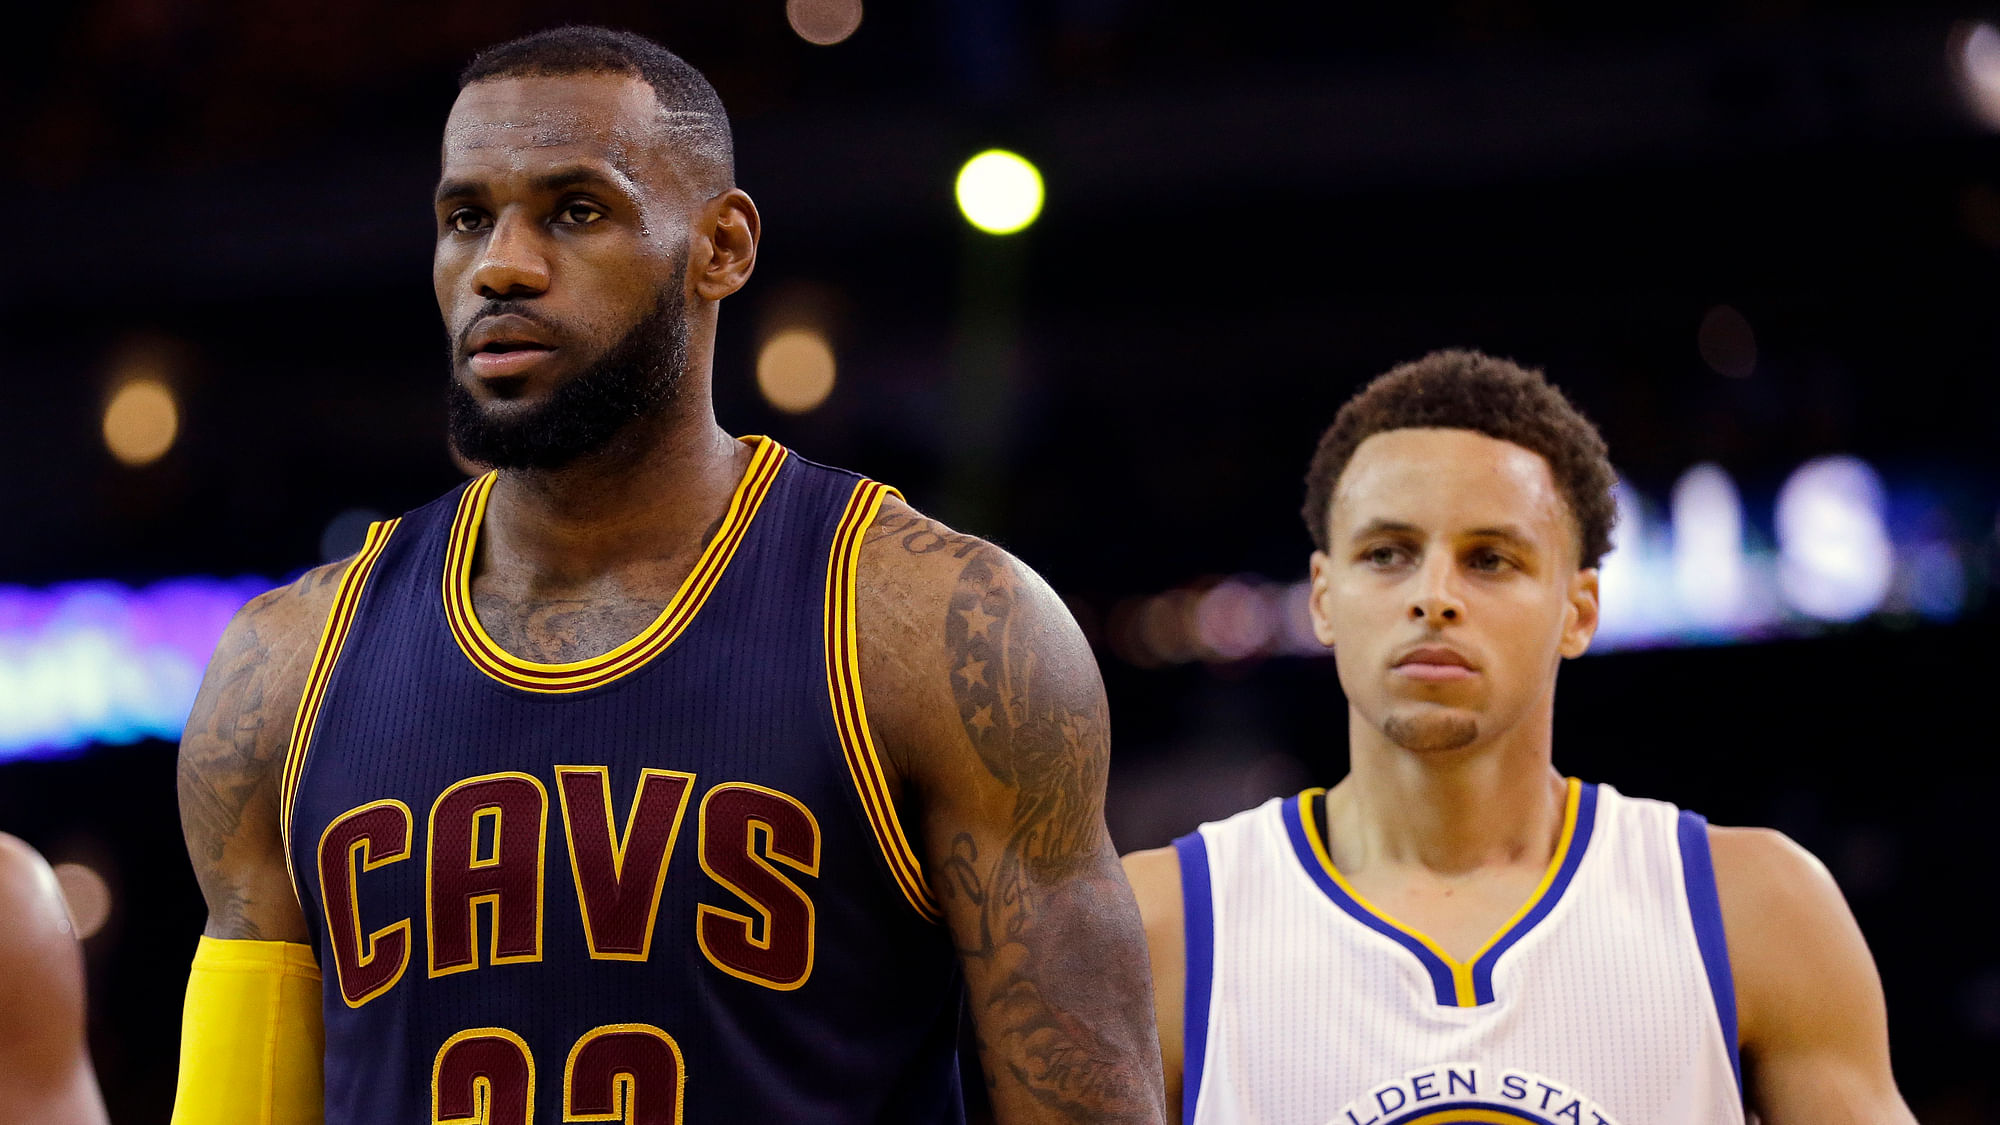 LeBron James’ Cleveland Cavaliers meet Stephen Curry’s Golden State Warriors in the NBA Finals for a fourth straight time.